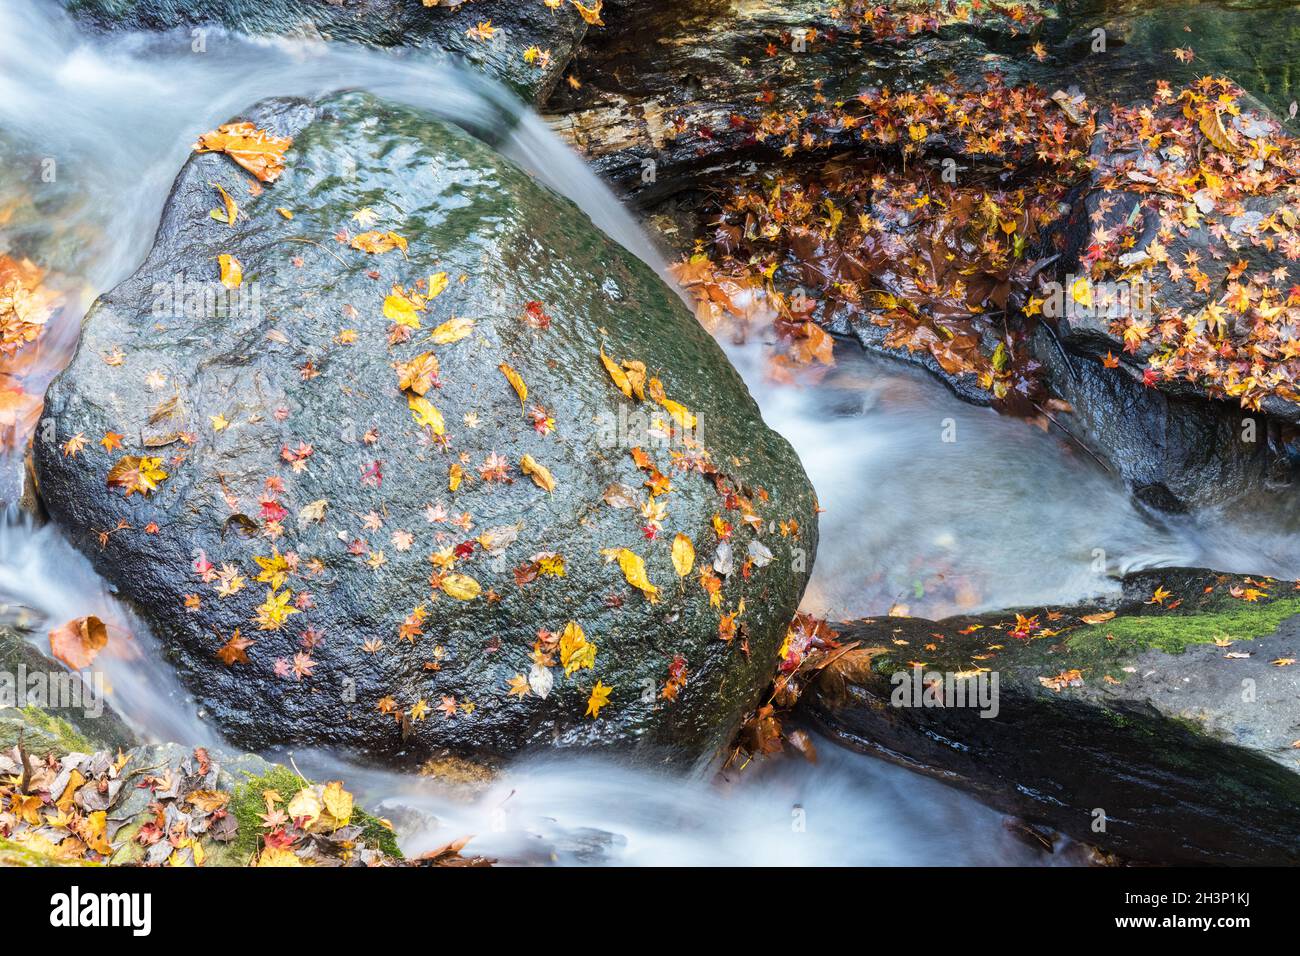 Beautiful stream and fallen leaves in autumn Stock Photo